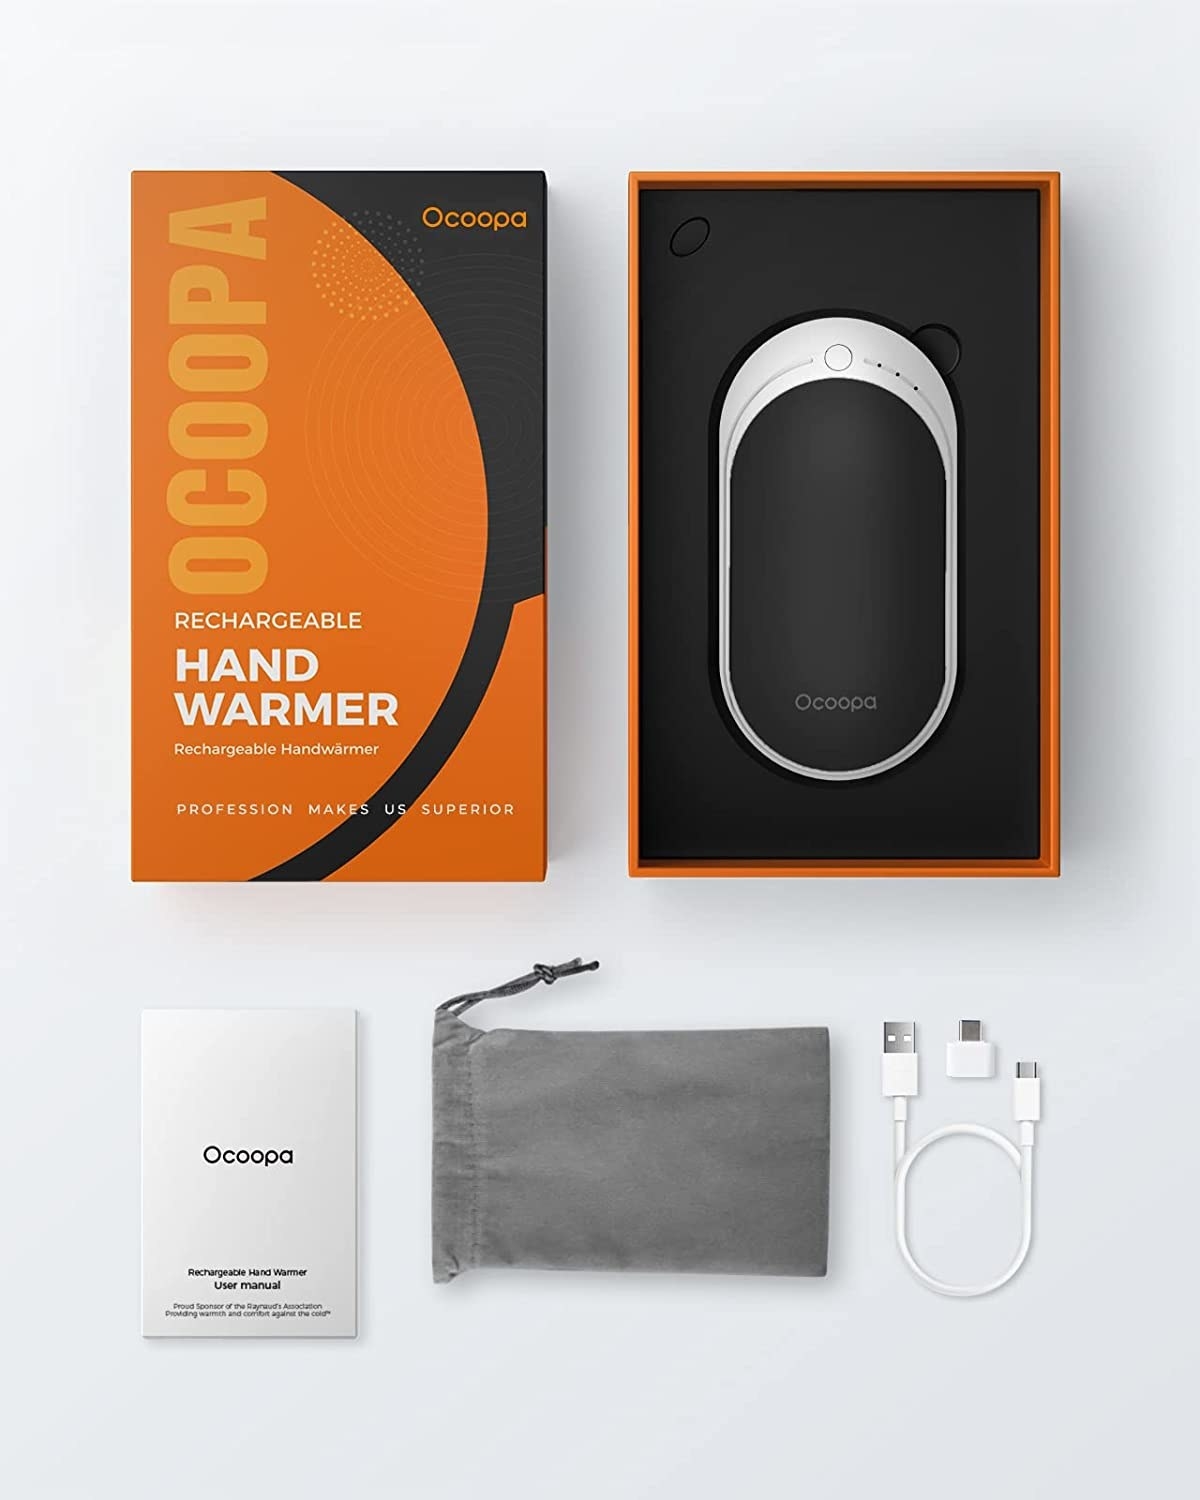 the hand warmer and the rest of the components it comes with